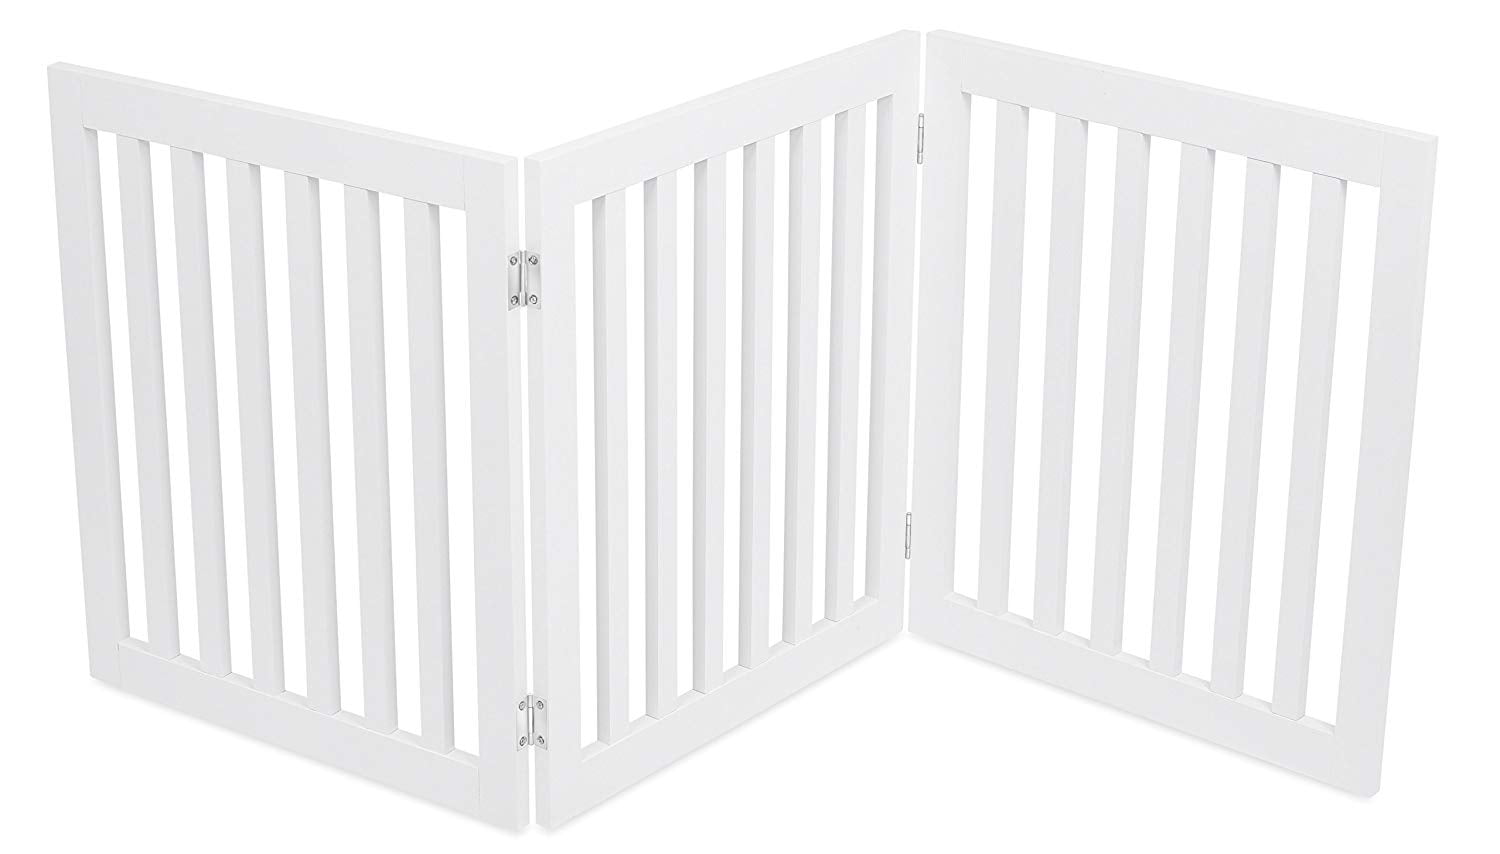 3 Three Panel Dog Gate Folding White Wood Pet Barrier With Door 82-124 × 61 cm 